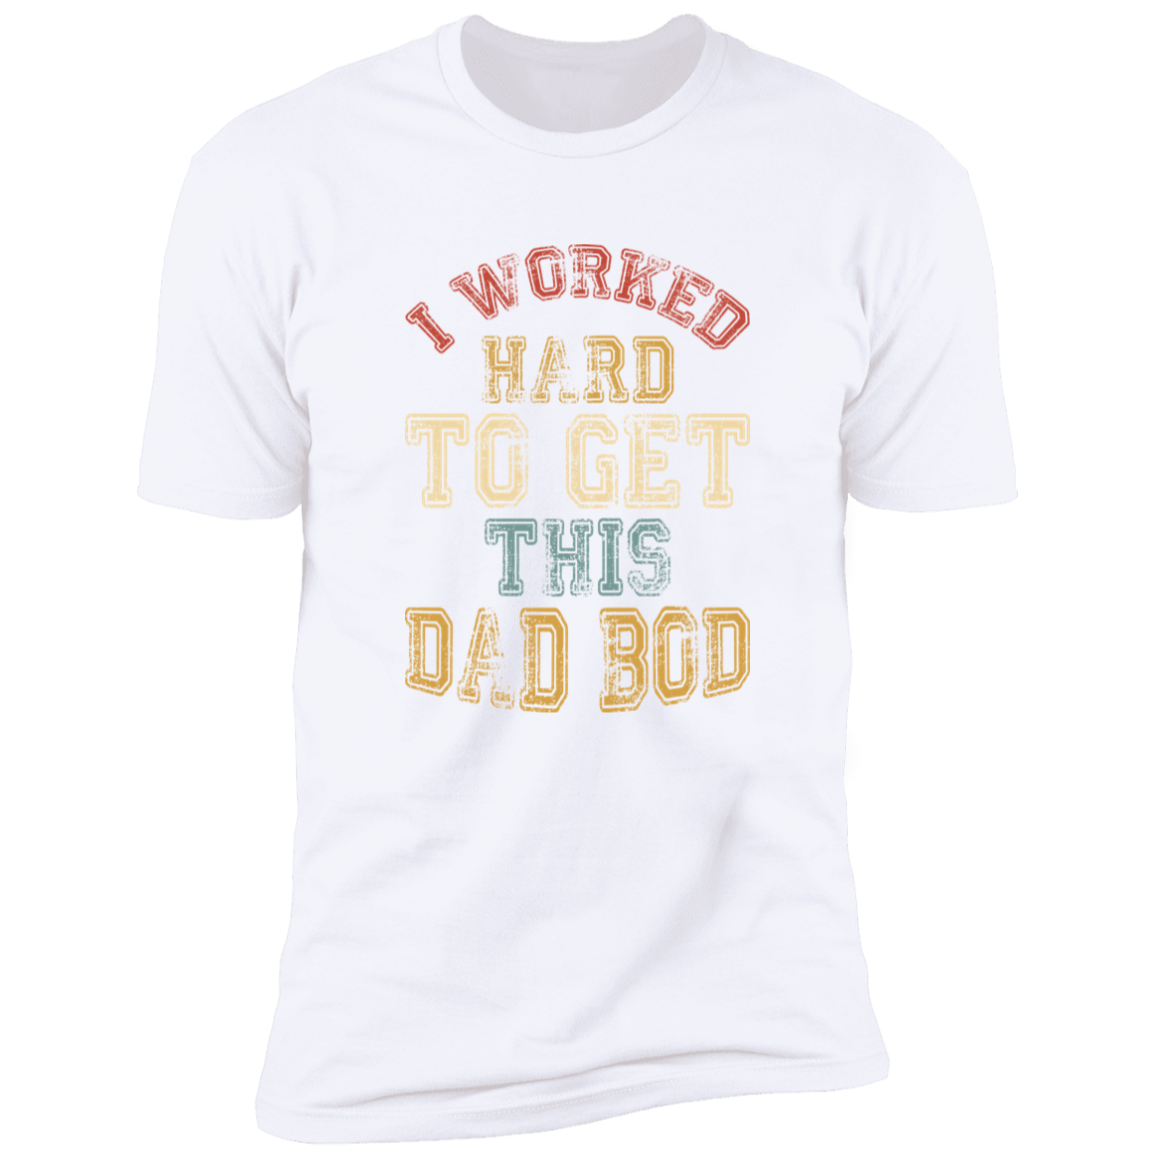 I Worked Hard To Get This Dad Bod |  Premium Short Sleeve Tee